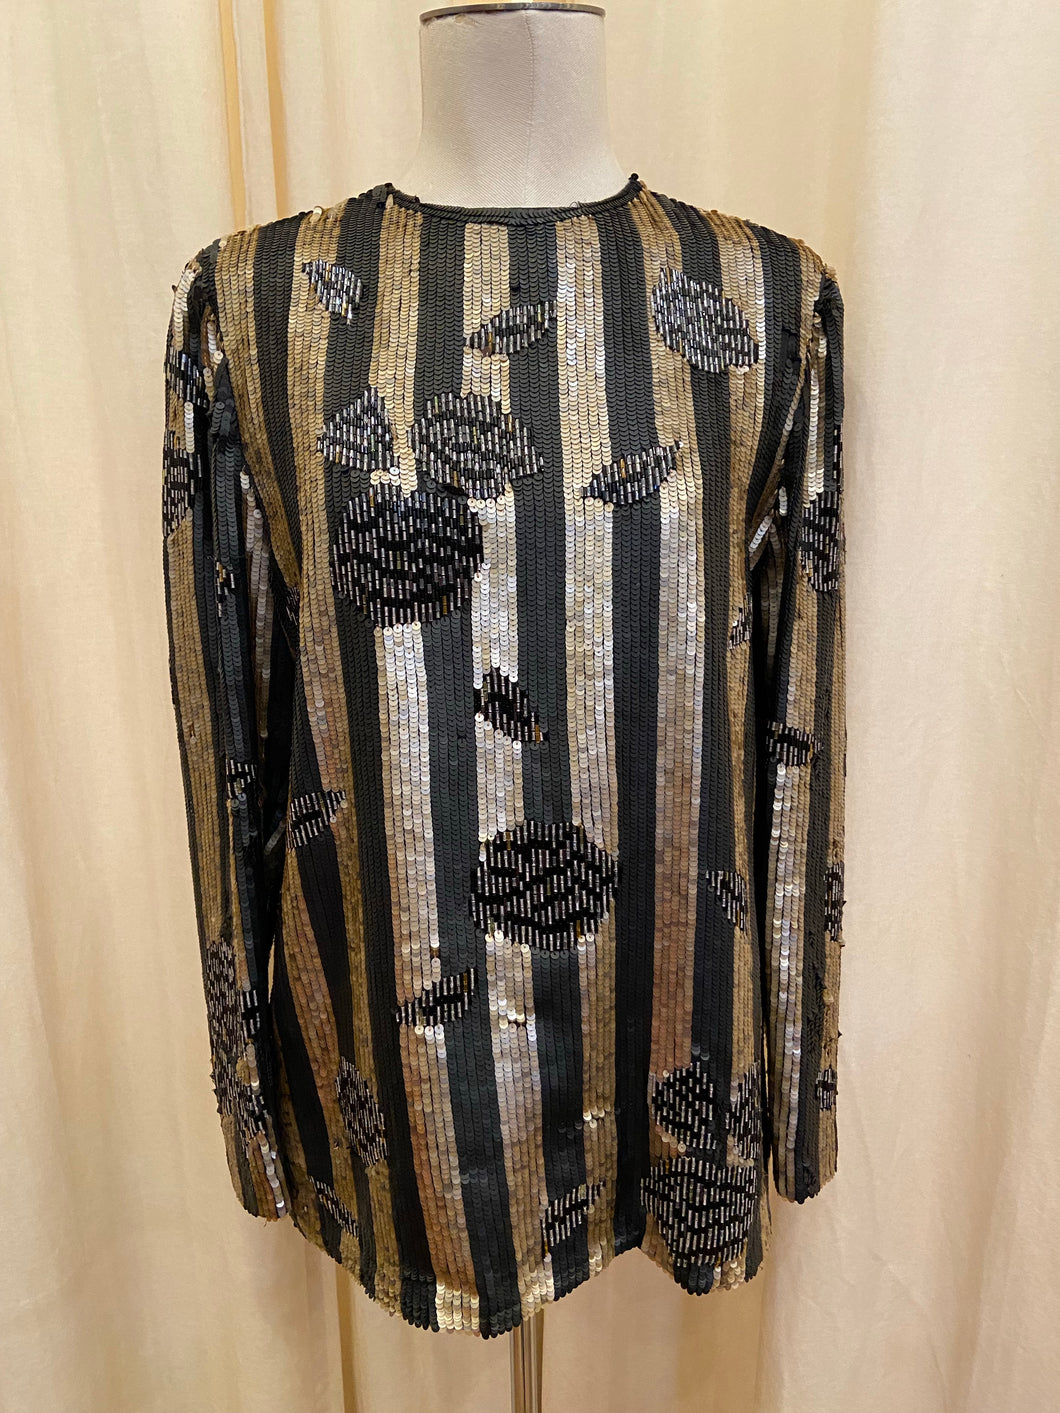 Vintage 50s Bill Blass matte sequin top with beaded accents